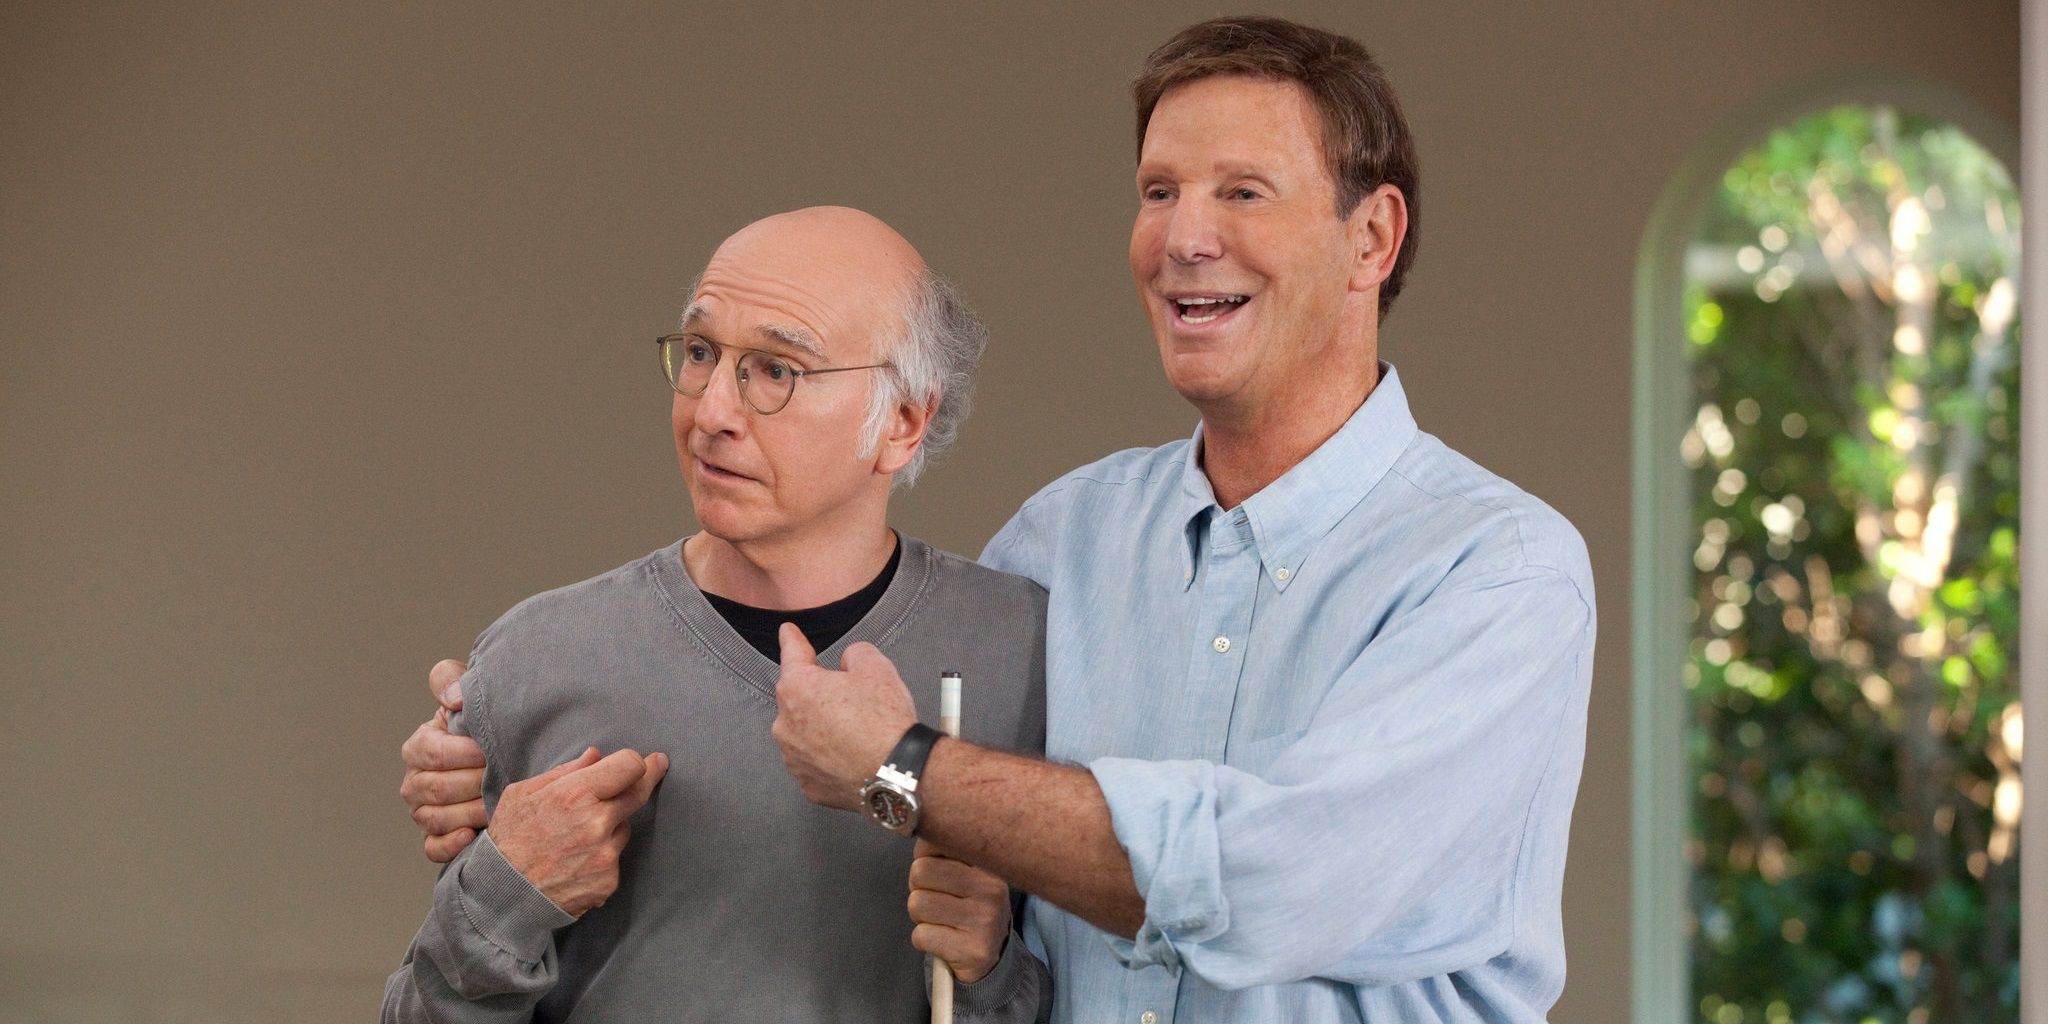 Curb Your Enthusiasm Main Characters Ranked By Intelligence